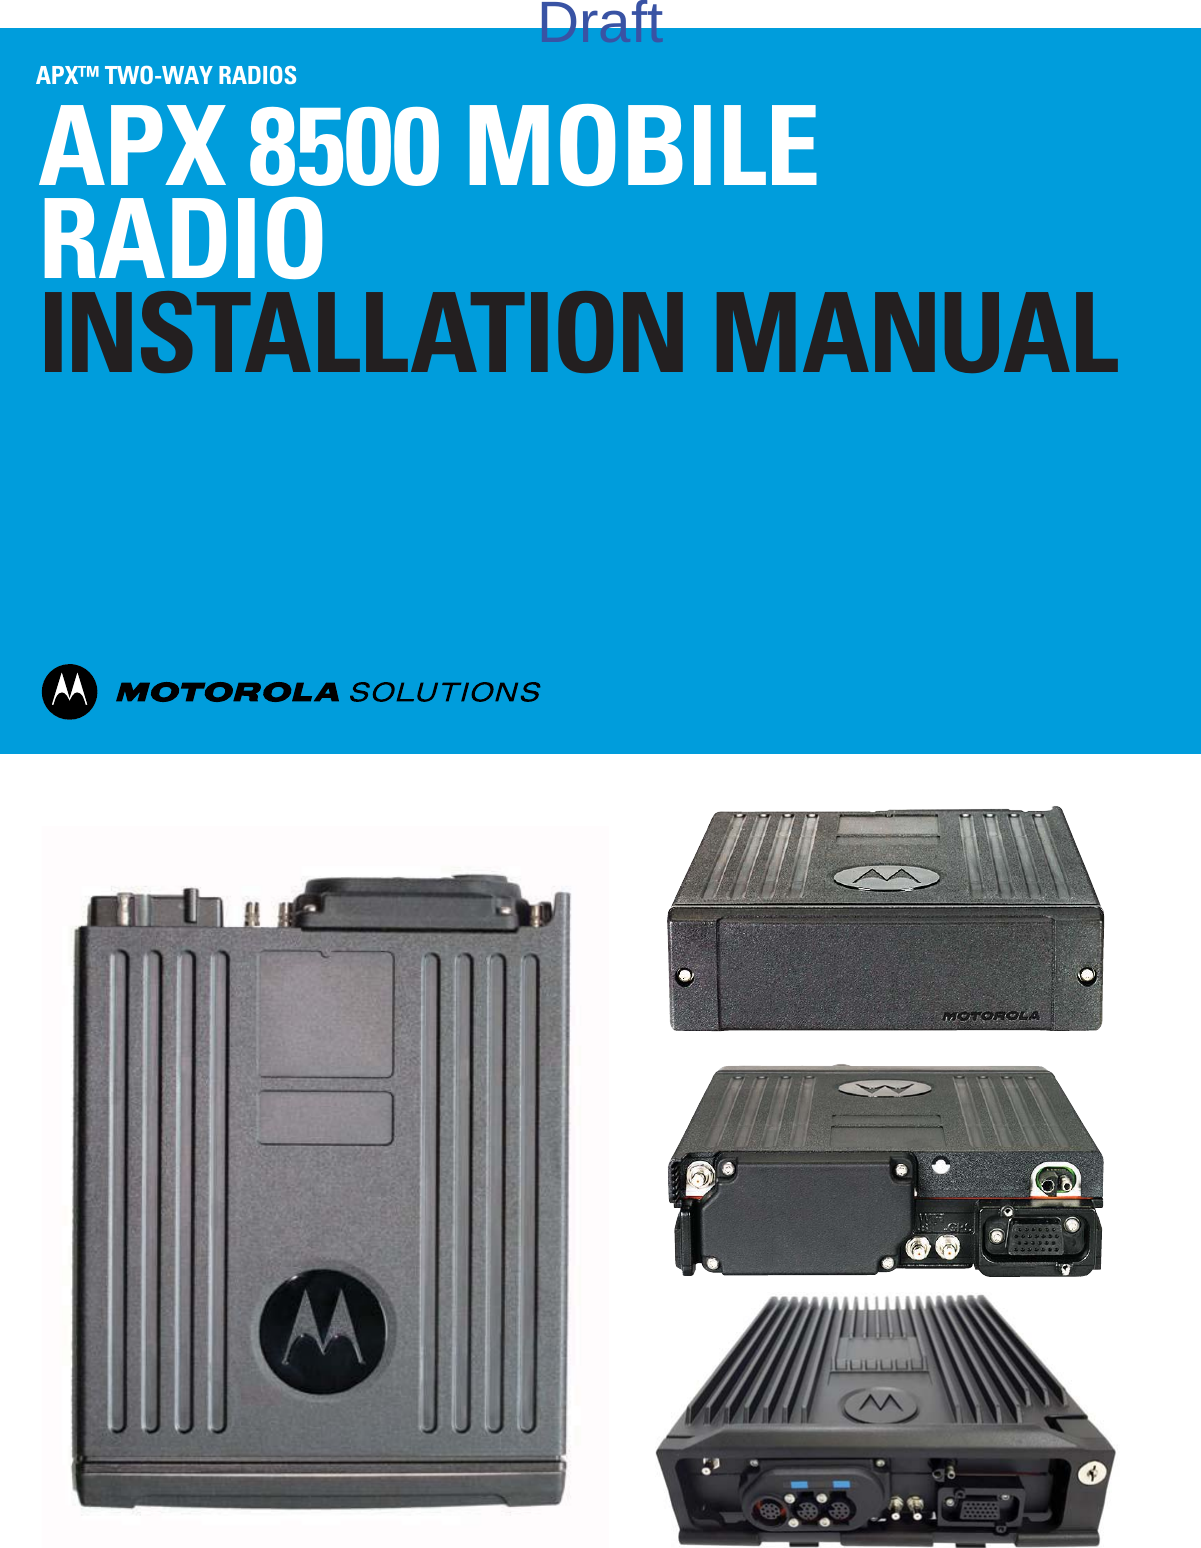 -i PageAPX™ TWO-WAY RADIOSAPX 8500 MOBILE RADIOINSTALLATION MANUALDraft